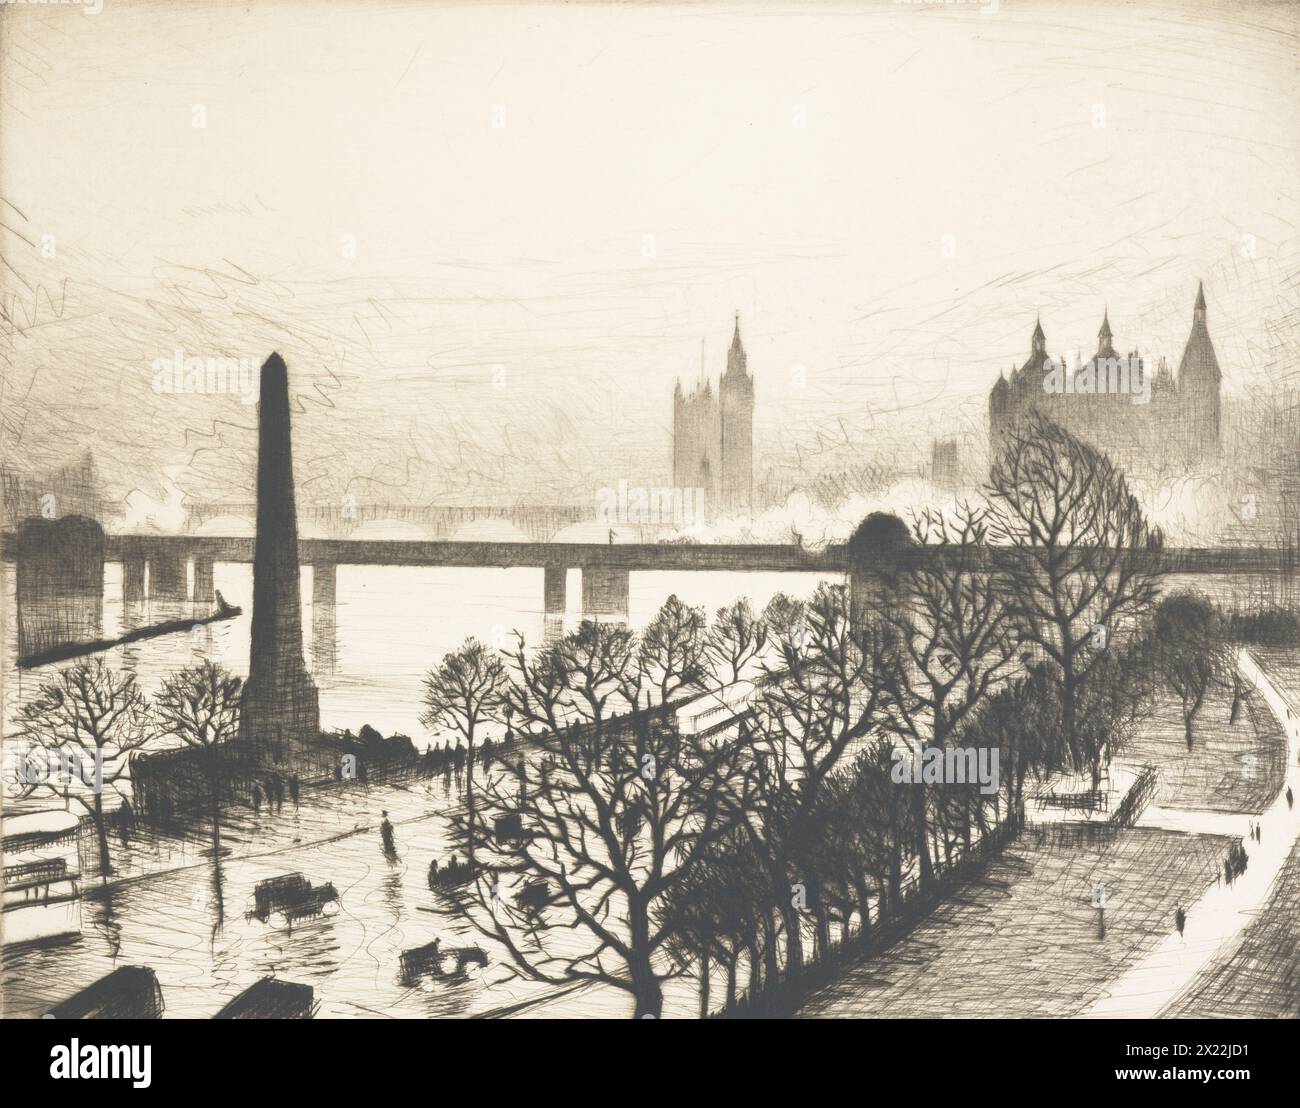 Westminster from a Savoy window, 1925 -1926. A winter view of the River Thames looking south west from an upper window at Savoy Hotel. Stock Photo